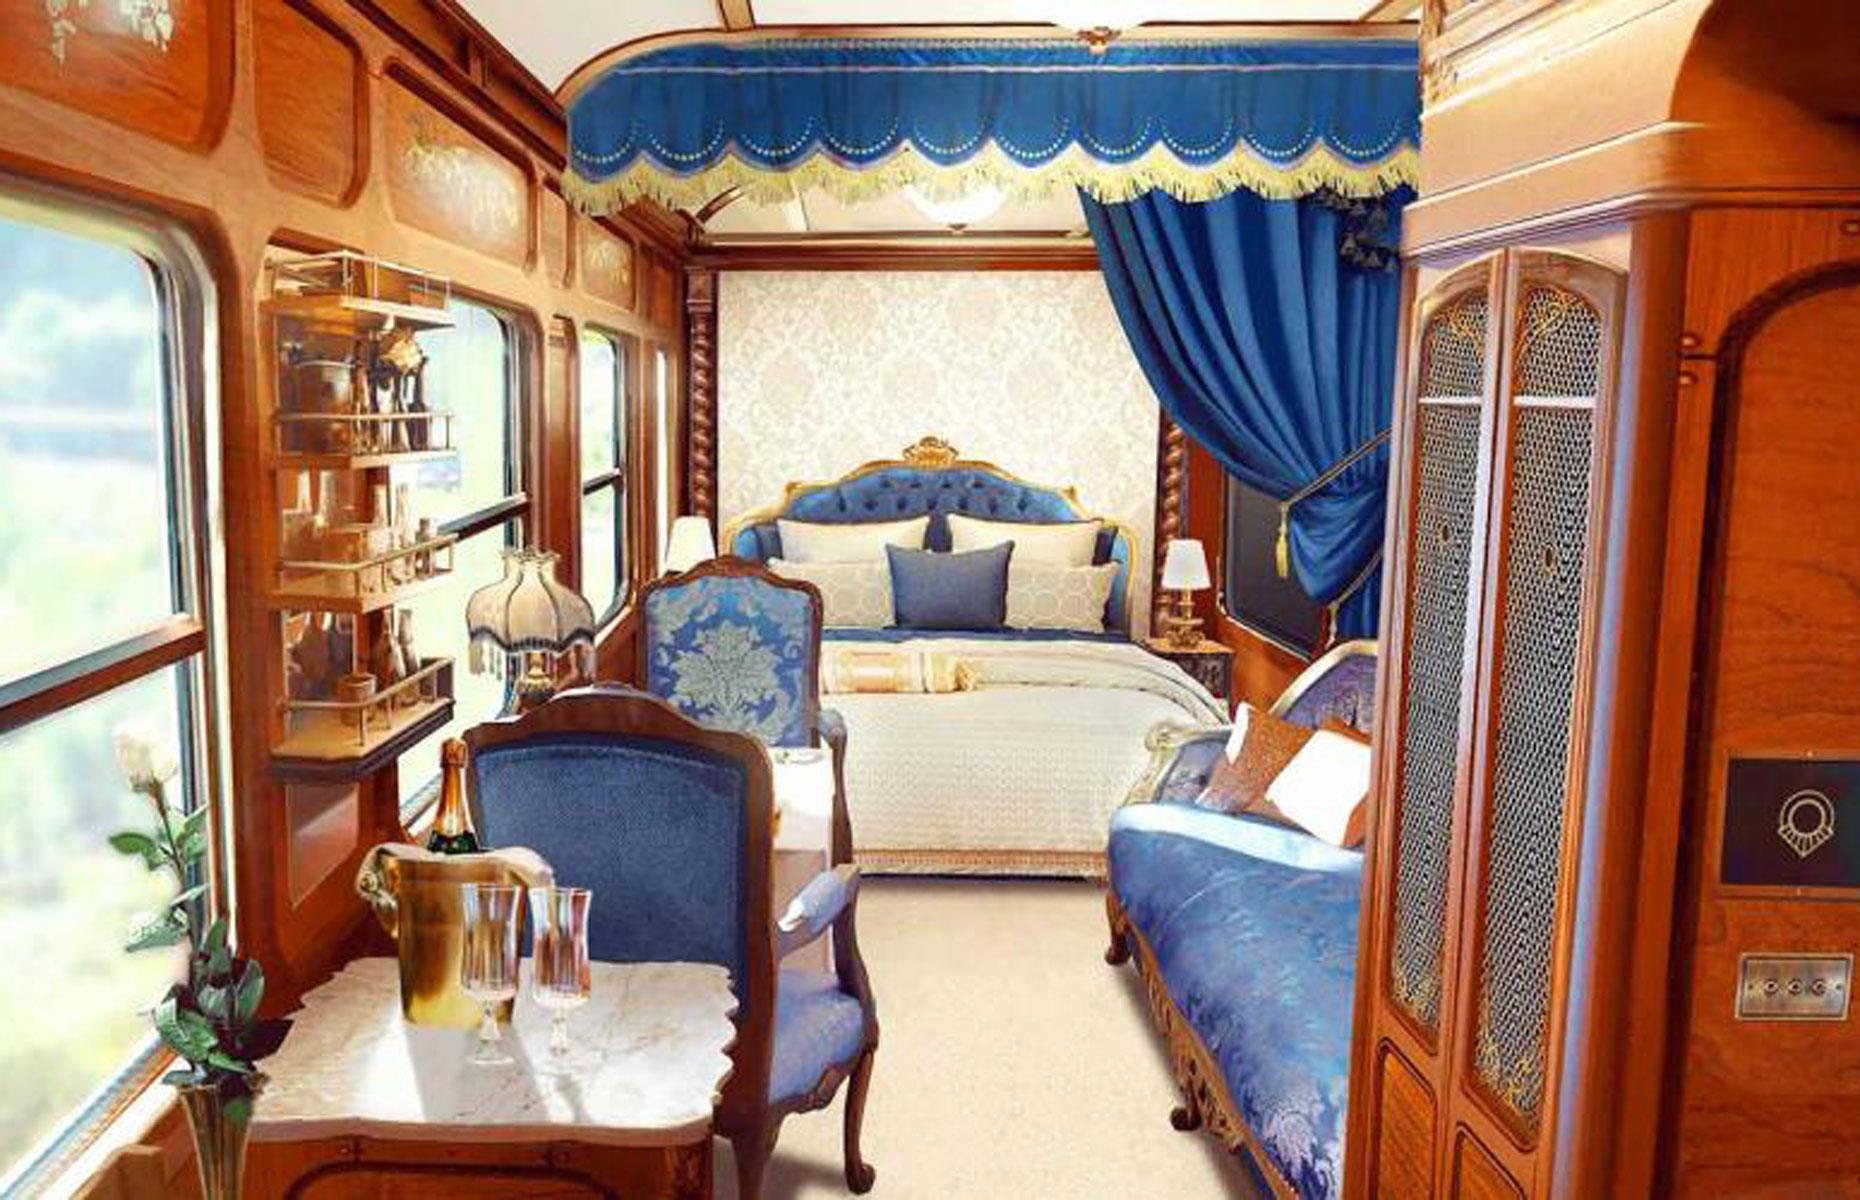 <p>The train comprises 18 cabins named after French historical figures, along with a sumptuous bar and restaurant cars, where guests can indulge in fine champagne and exquisite cuisine designed by three Michelin-starred chef Alexandre Couillon, who's featured on the hit Netflix show <em>Chef's Table</em>.</p>  <p>The Adjoining Suites are Le Grand Tour's more extravagant cabins. They each span an extra-generous 269 square feet (25 square metres) and include a double bedroom, lounge, and private bathroom. A dedicated butler caters to guests every whim. Prices start from $17,816 (£14,018) per person, which works out at $3,563 (£1,865) per night.</p>